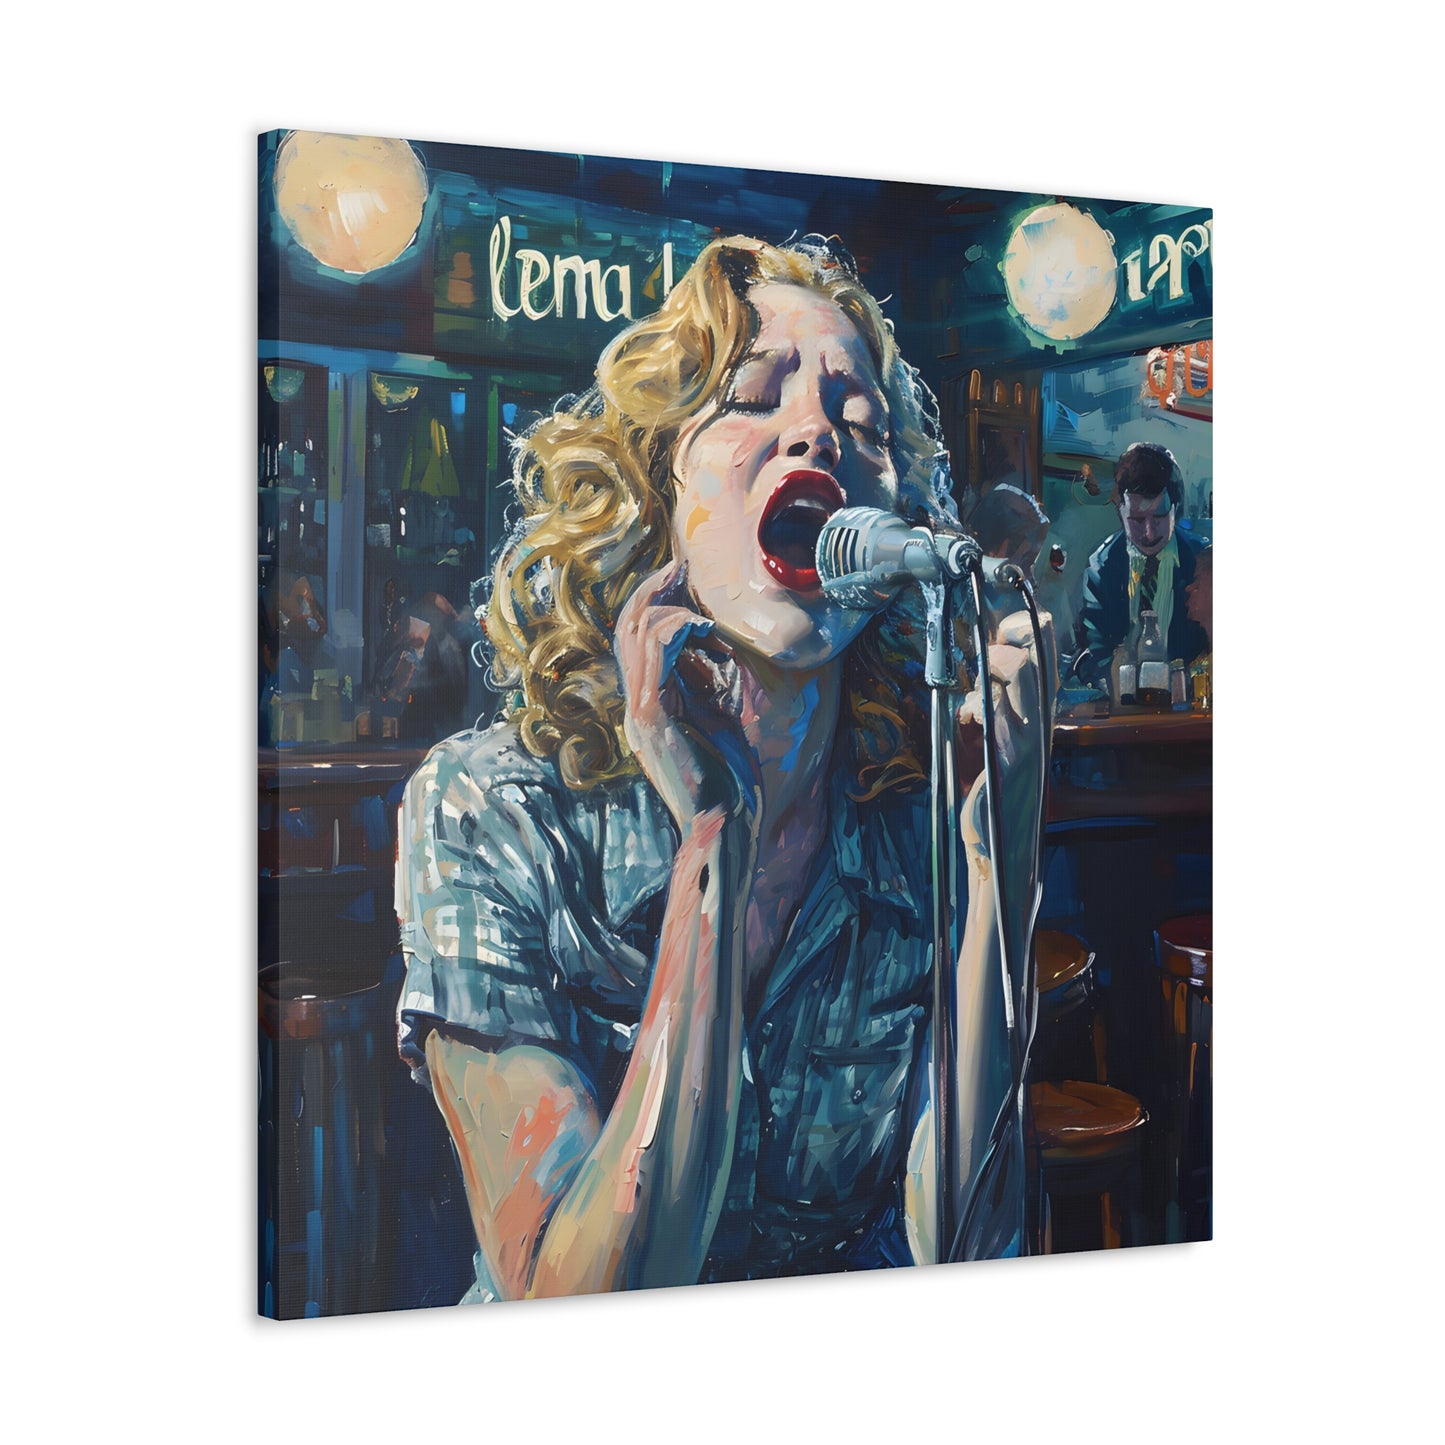 angled 2 Artwork evoking 'American Pie' by Don McLean, with a singer's expressive performance reflecting the song's themes of innocence lost and enduring music, set in a moody, dimly lit bar ambiance.